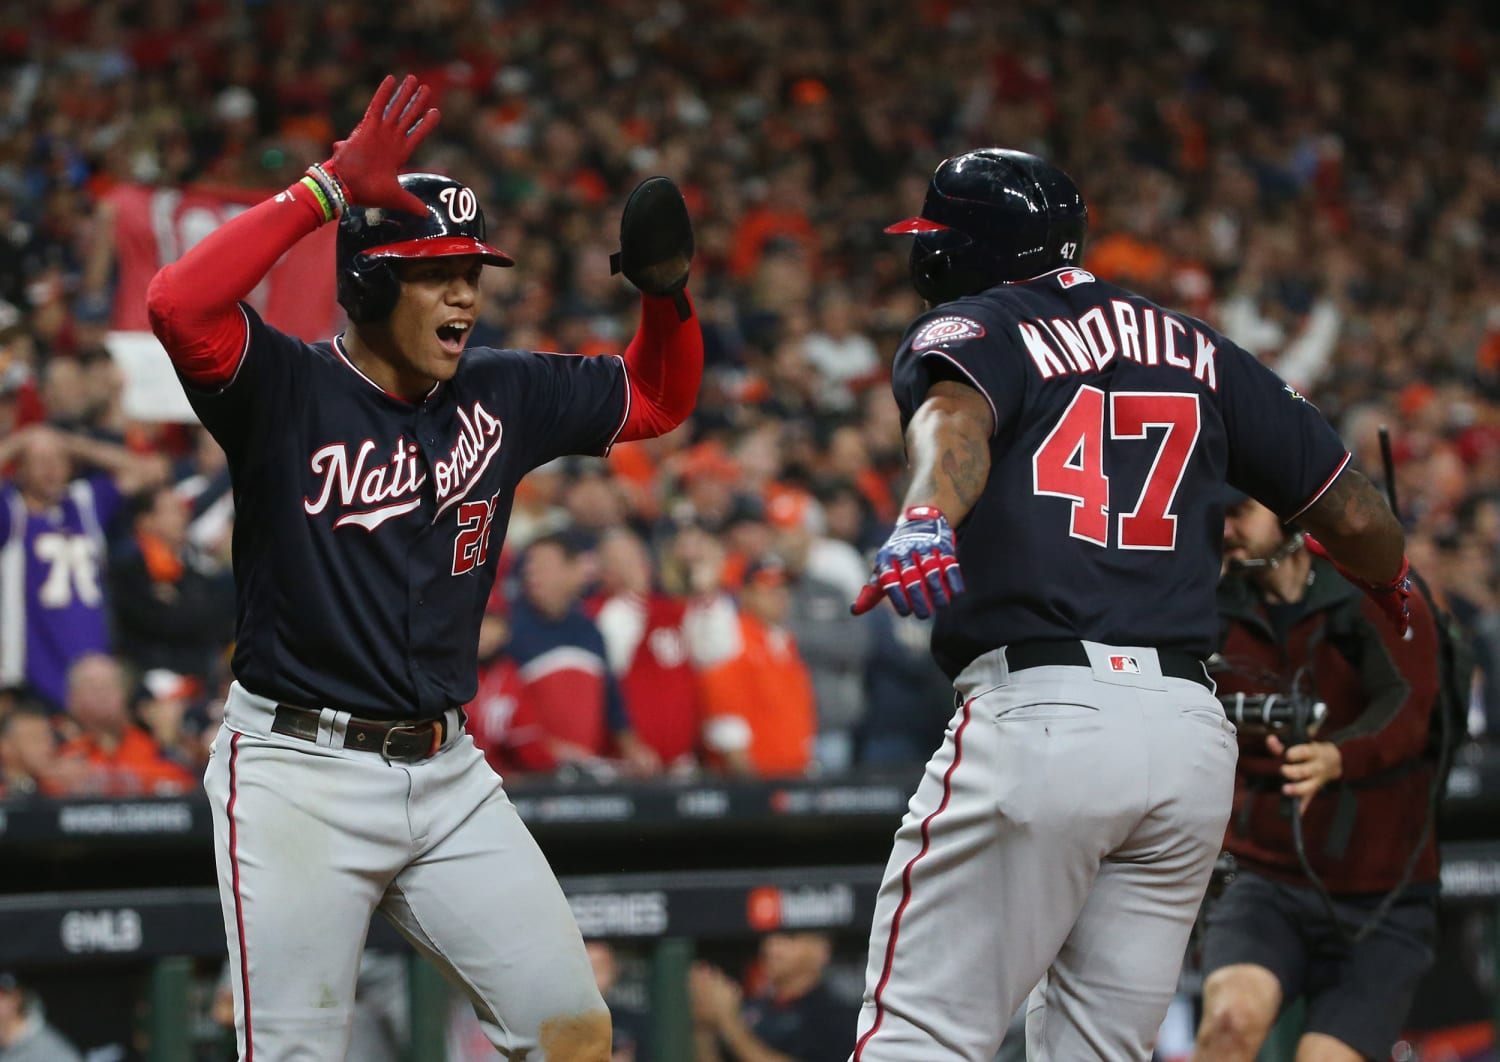 End of the road: Nationals beat Astros in Game 7 to win World Series